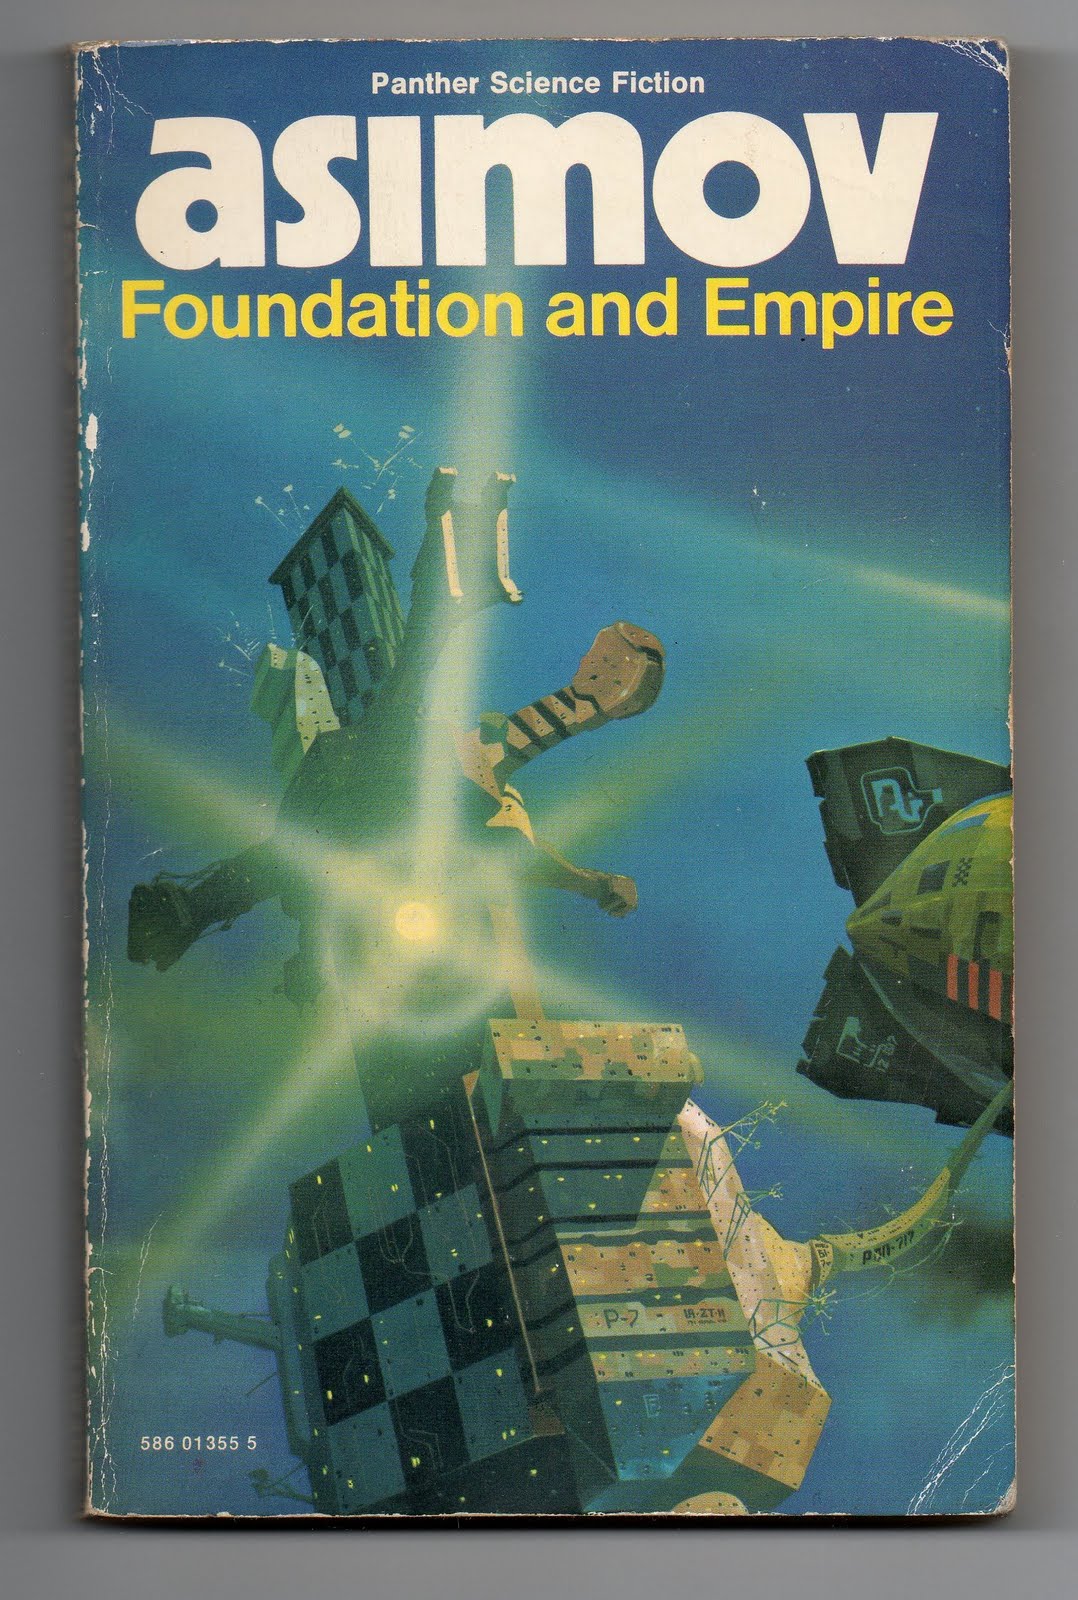 Eight Miles Higher Isaac Asimov The Foundation Trilogy